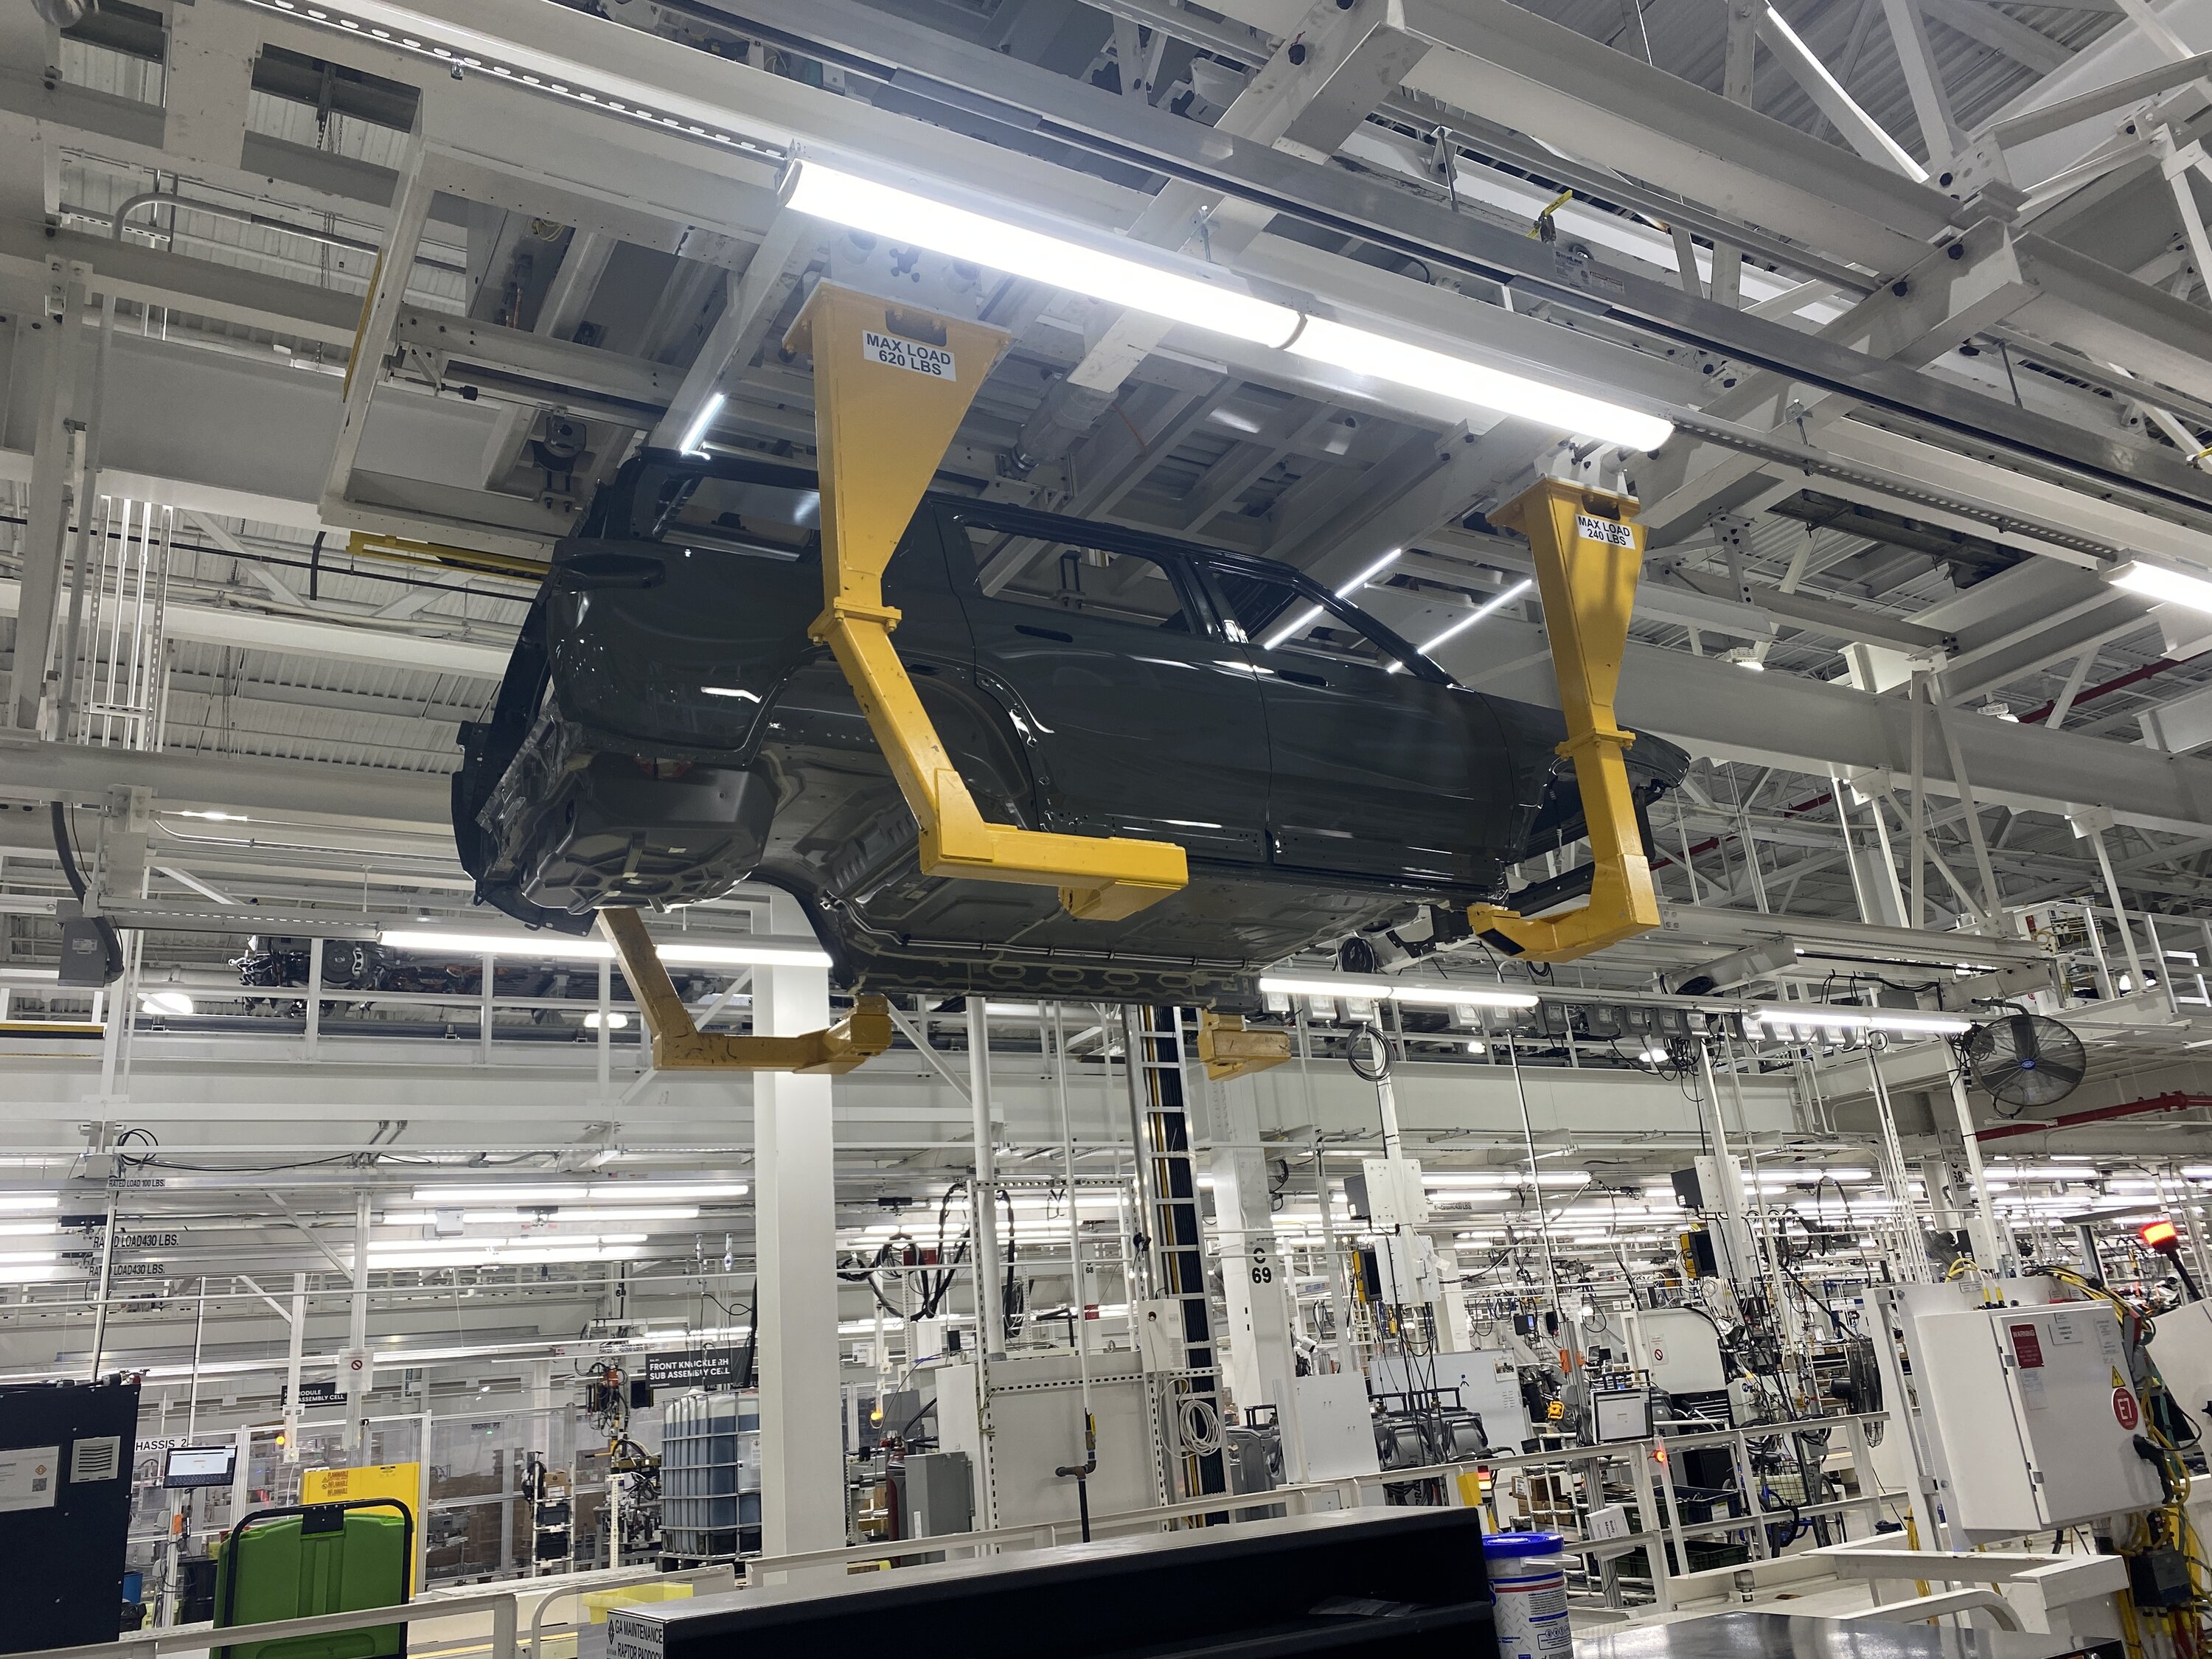 Rivian R1T R1S Rivian Holiday Family Day - Our self guided tour of the factory floor (Photos) 4F92DD30-5B7D-46B7-B61A-835AD7526871